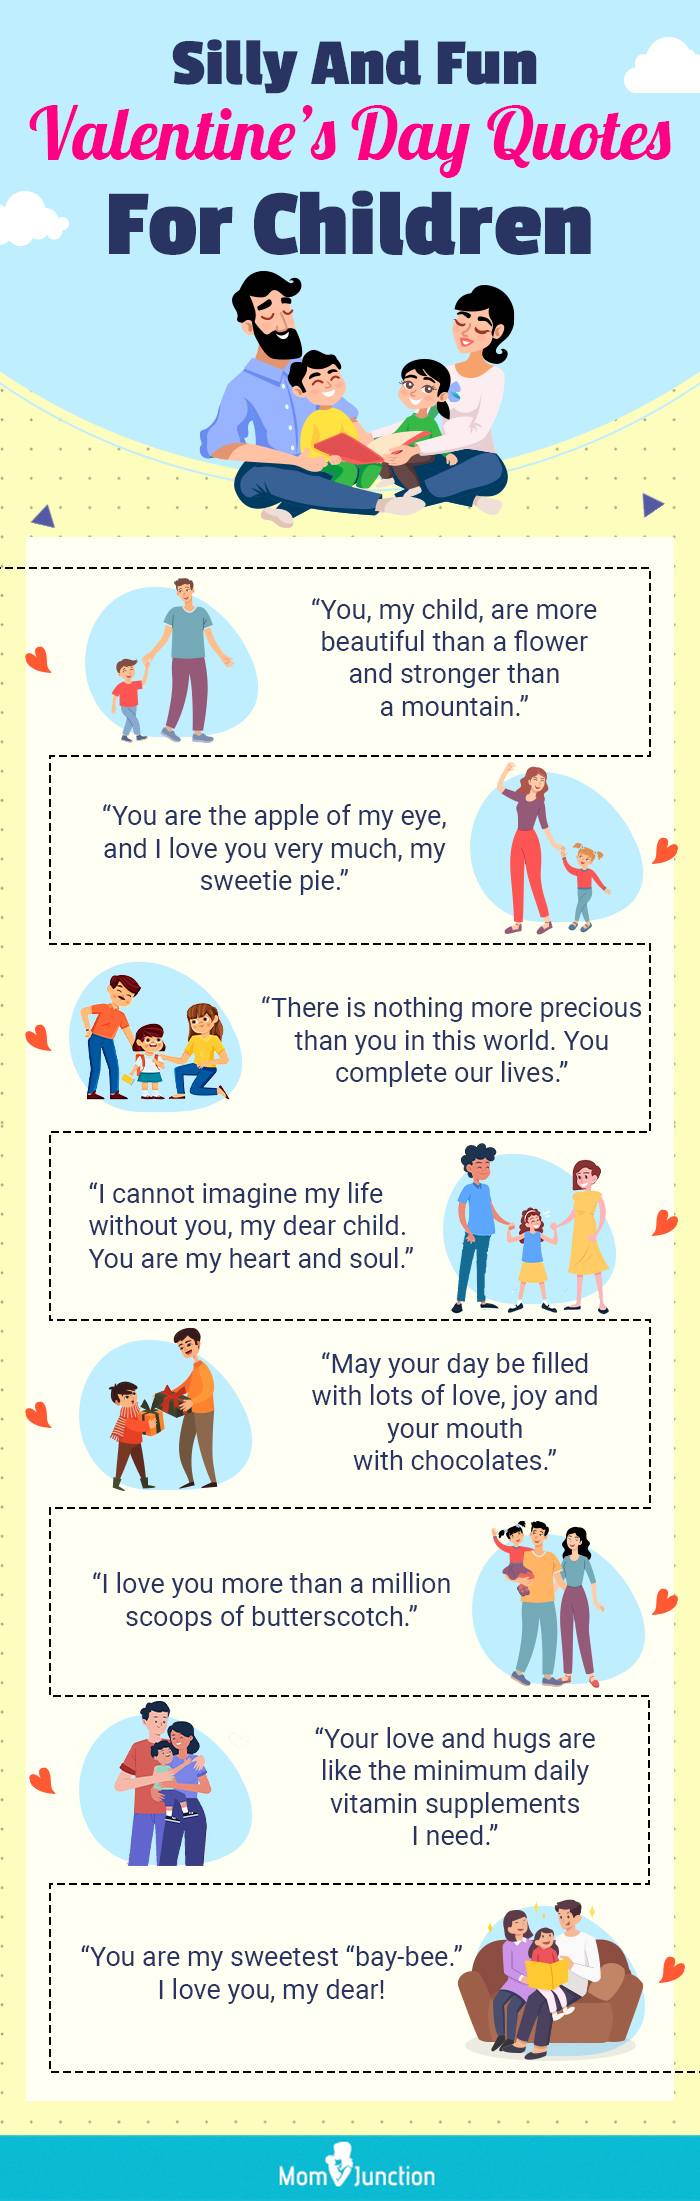 silly and fun valentines day quotes for children (infographic)